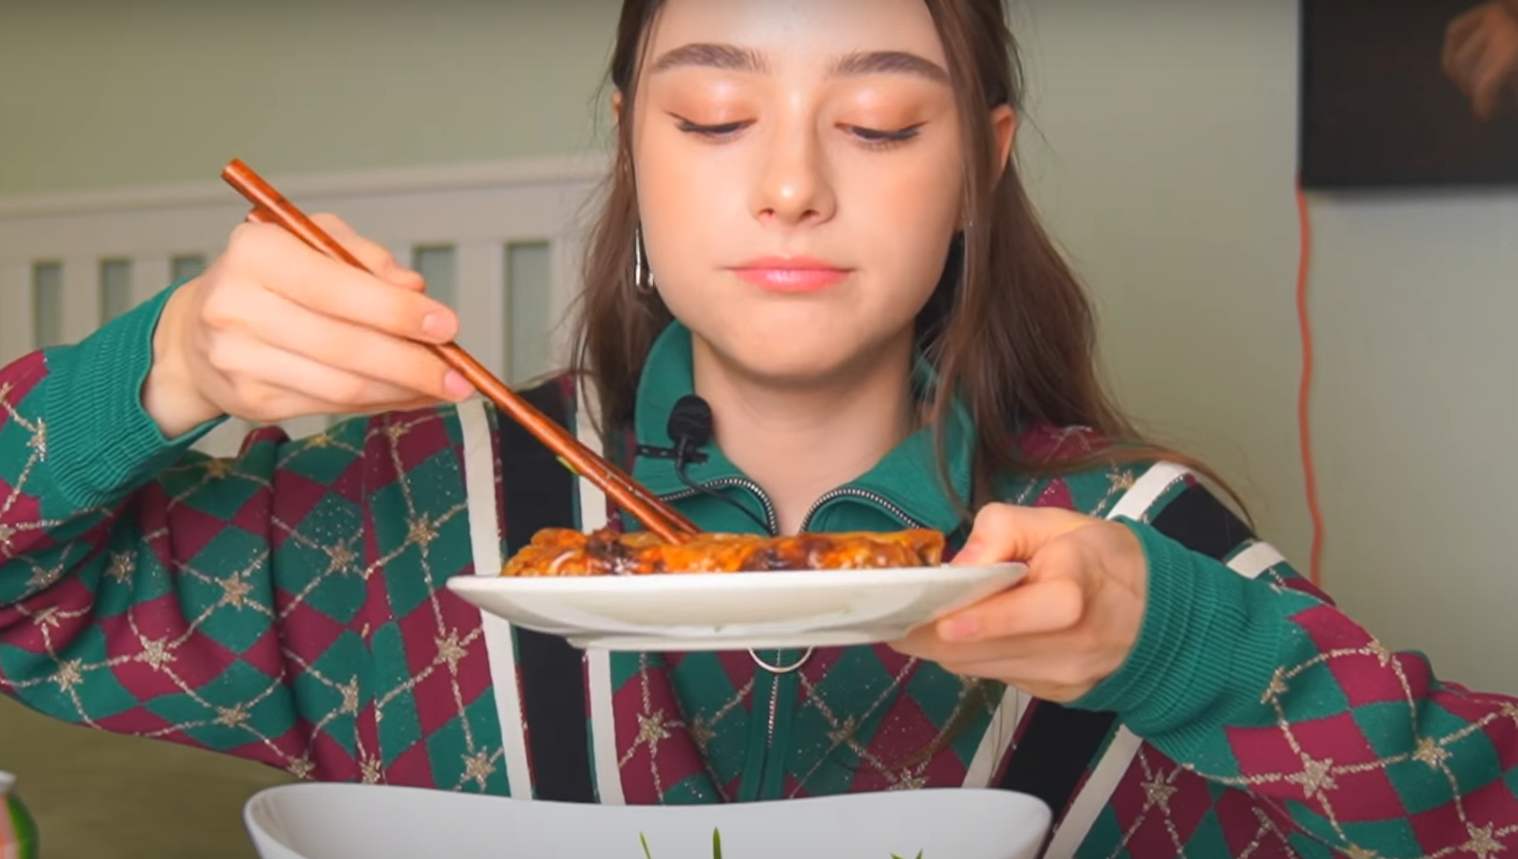 A picture of Dasha in a Mukbang